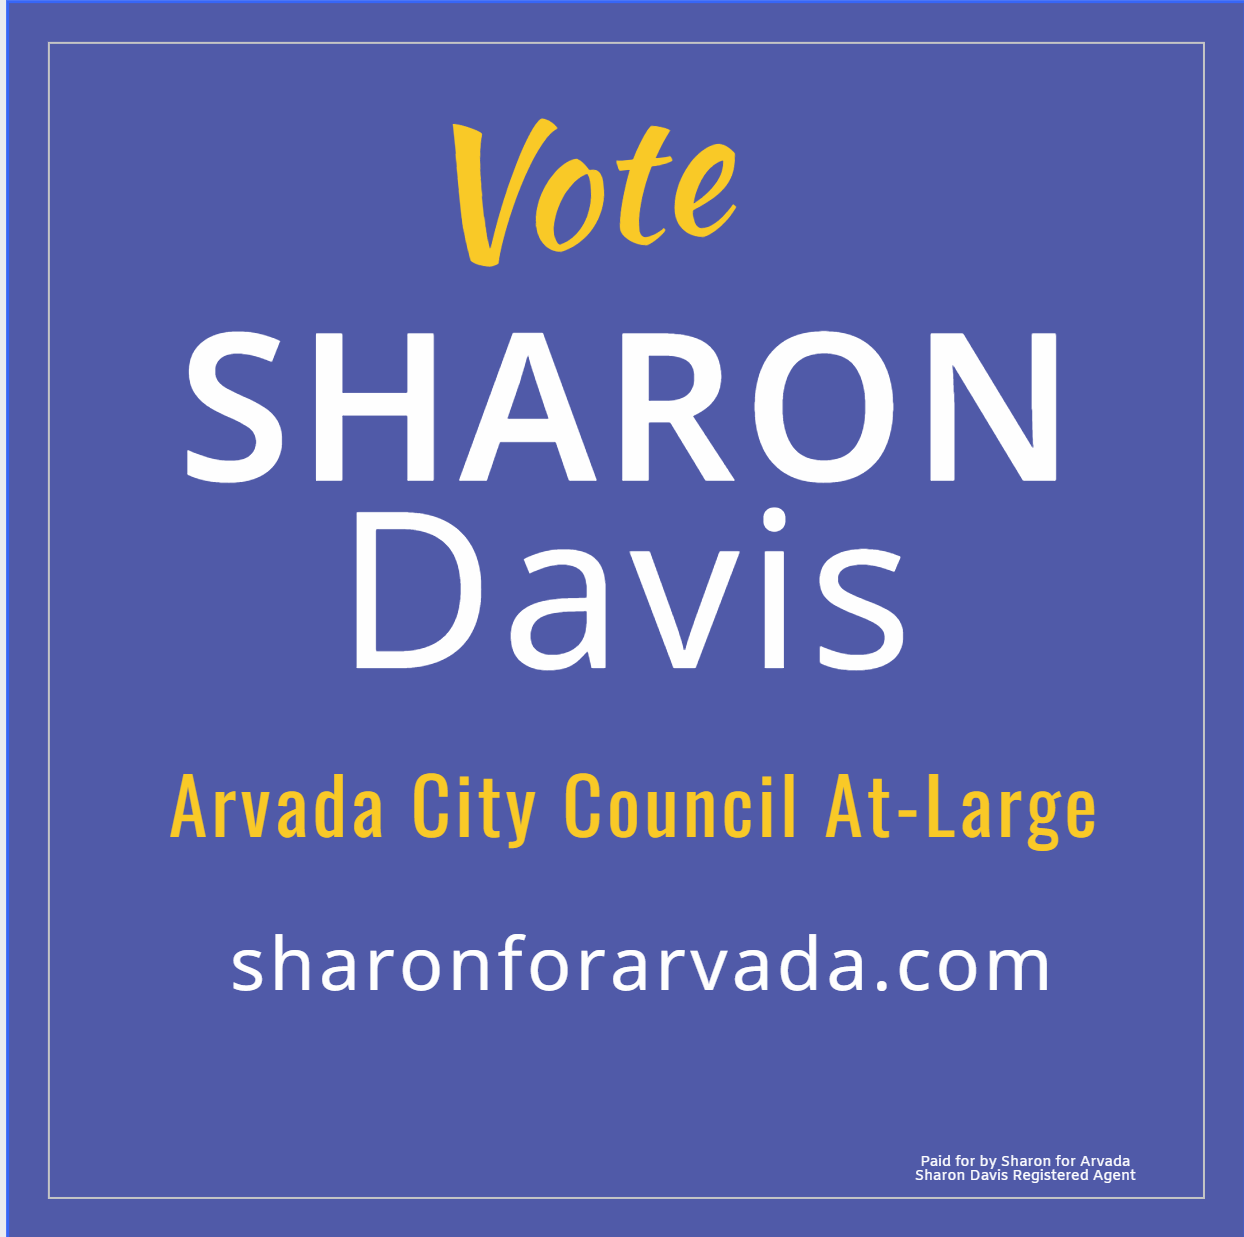 Sharon for Arvada